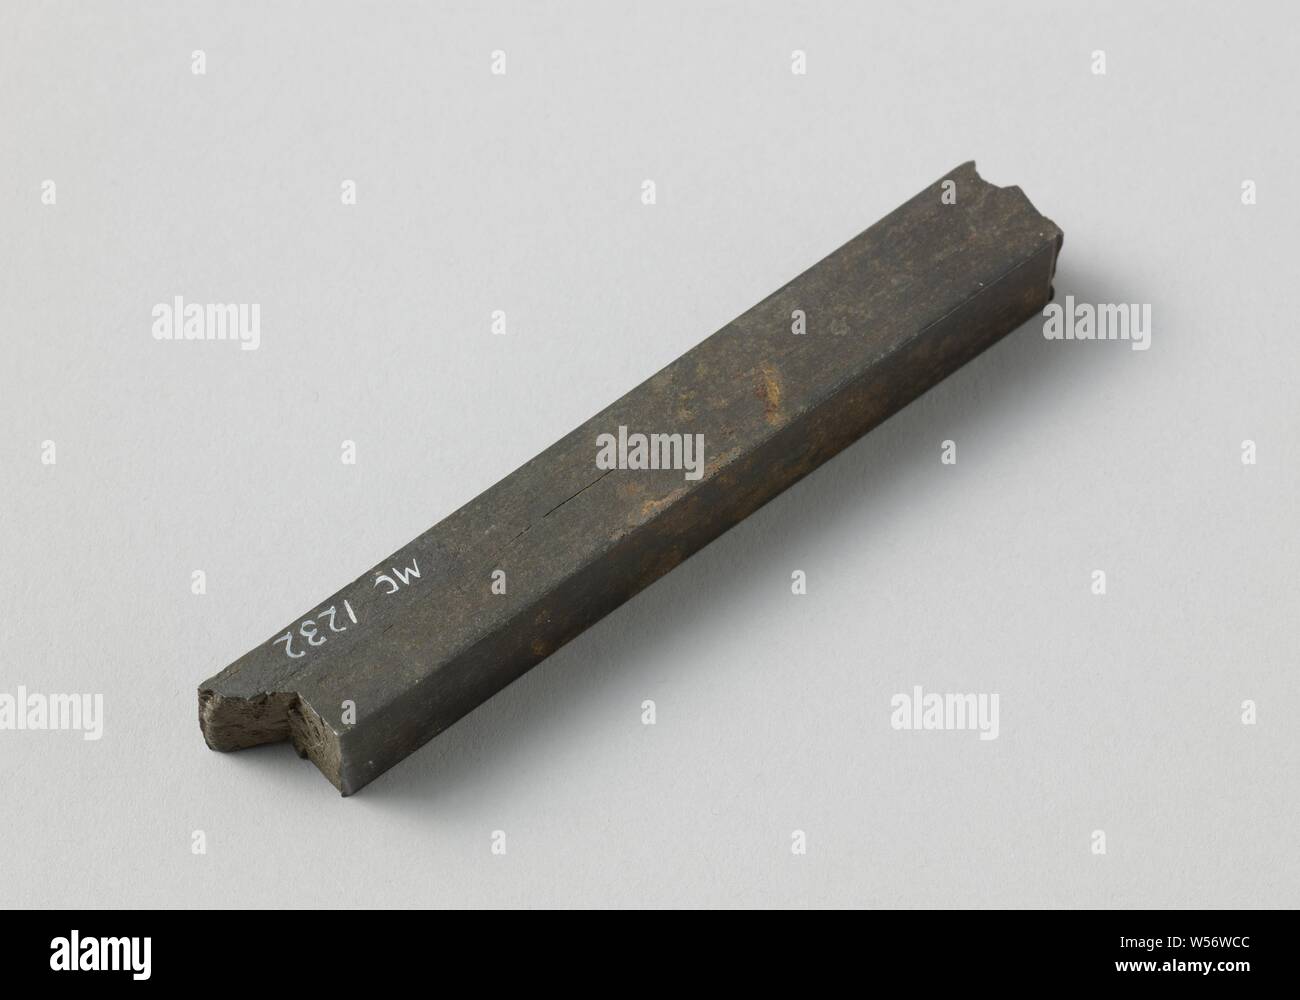 Sample of Steel, Sample of Heaton's steel, made from medium iron. It is a rod with a square cross-section of ½ English thumb, the ends broken off or torn., John Heaton, United Kingdom, 1868, steel (alloy), h 1.4 cm × w 10.3 cm × d 1.4 cm Stock Photo